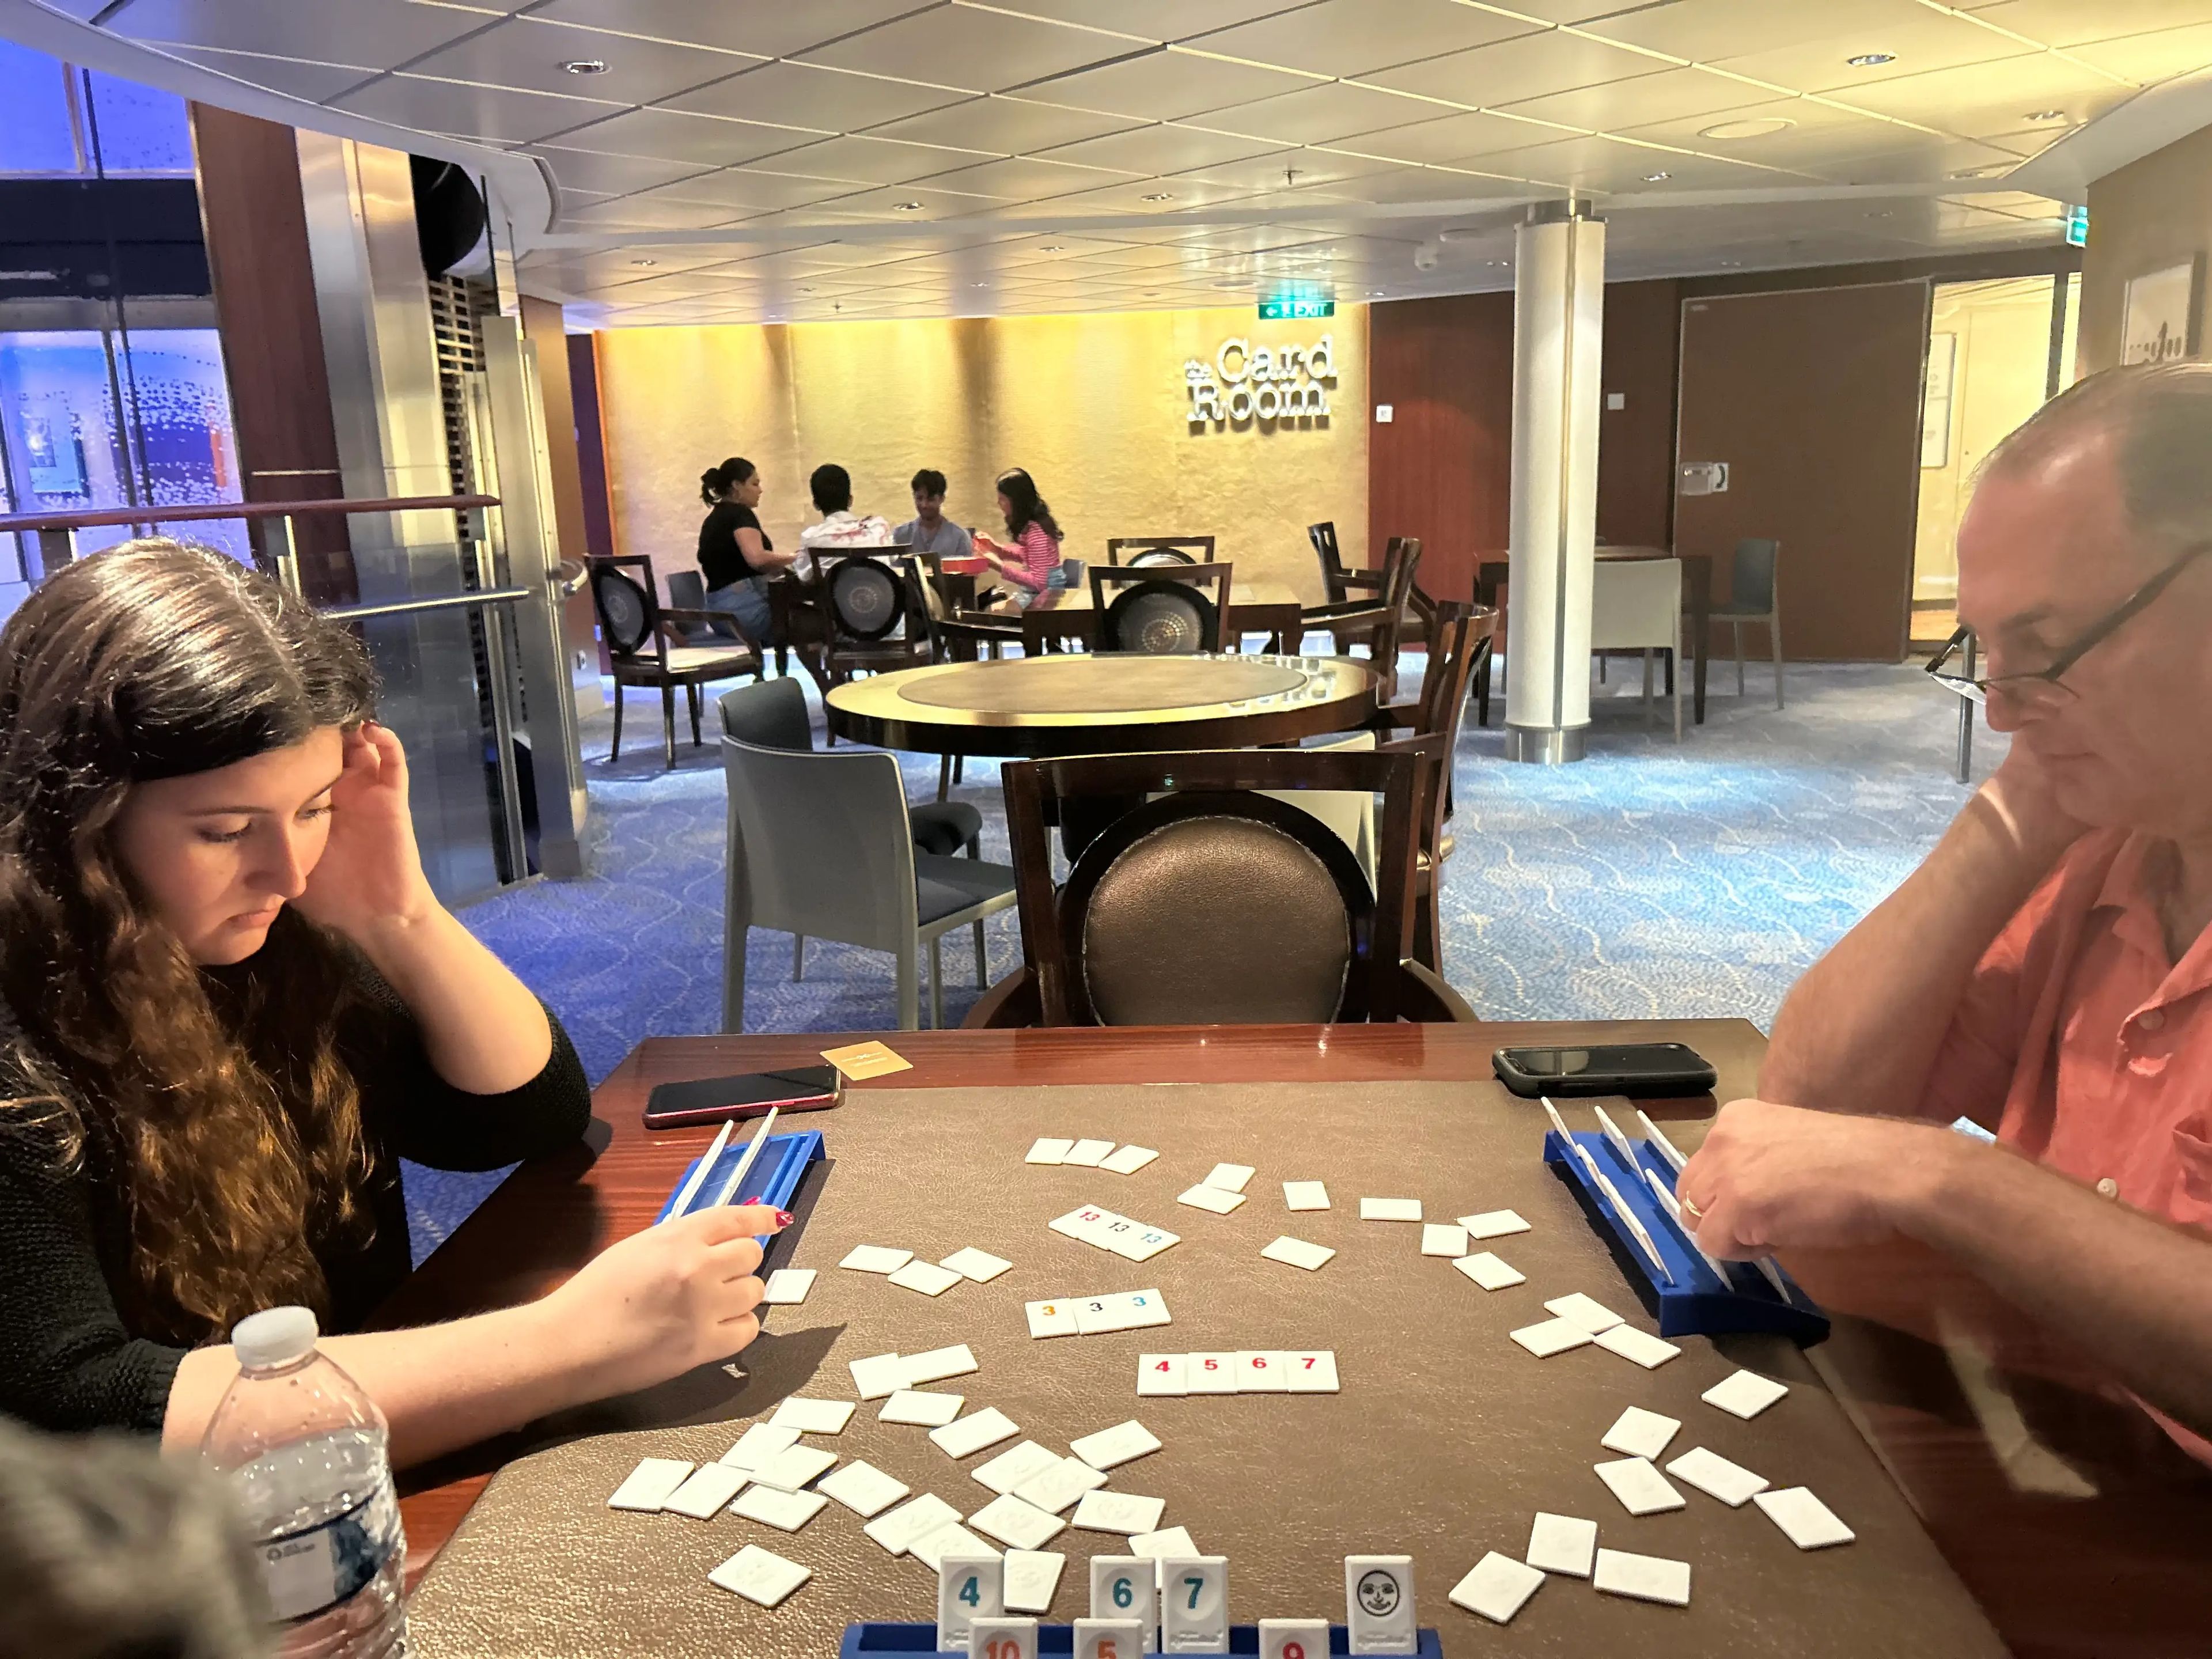 jordana's family playing games in the card room of a cruise ship